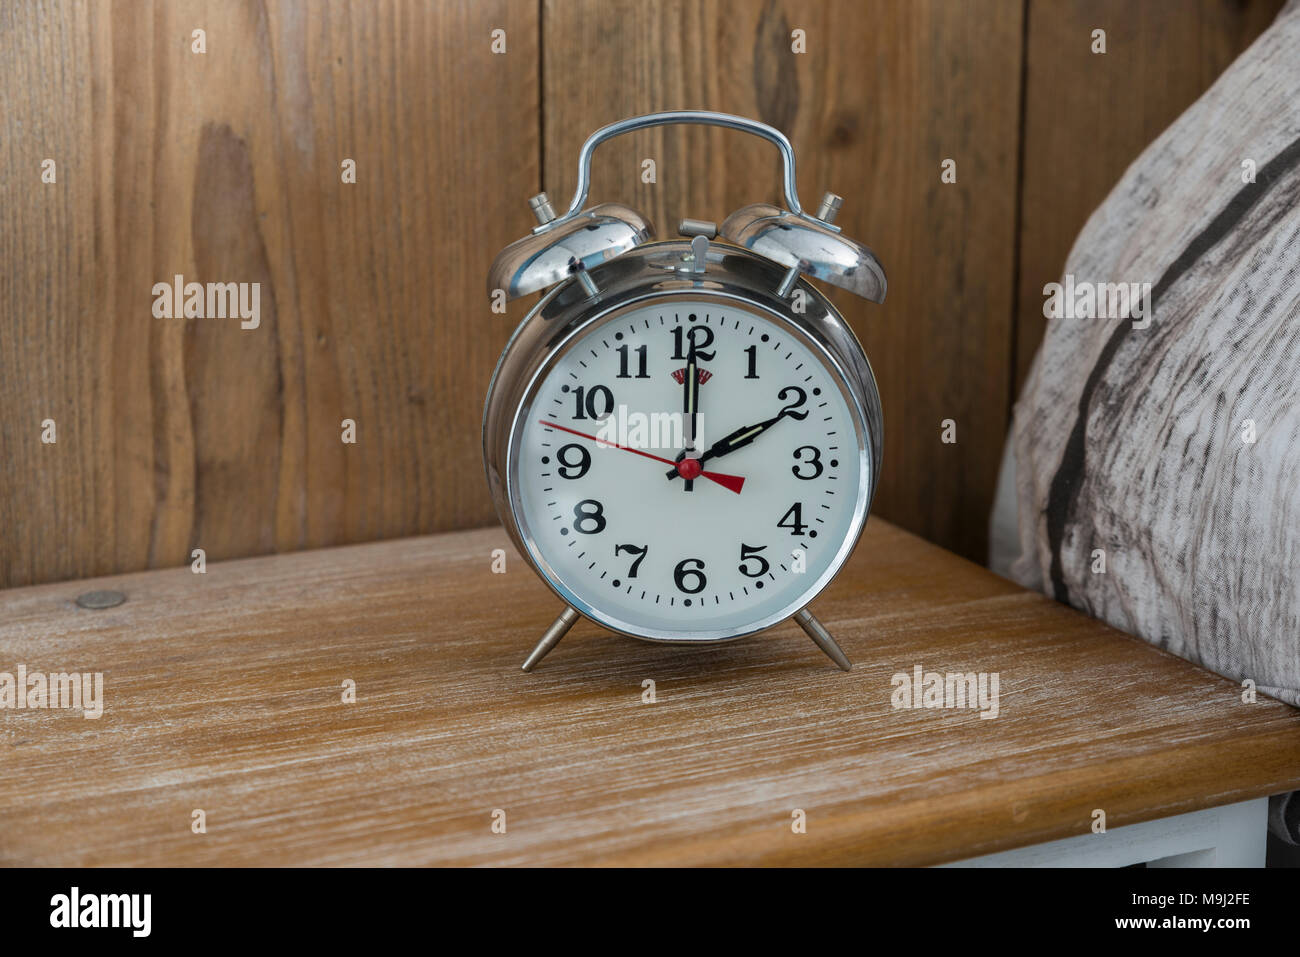 An old fashioned silver coloured bed side analogue pre digital alarm clock Stock Photo